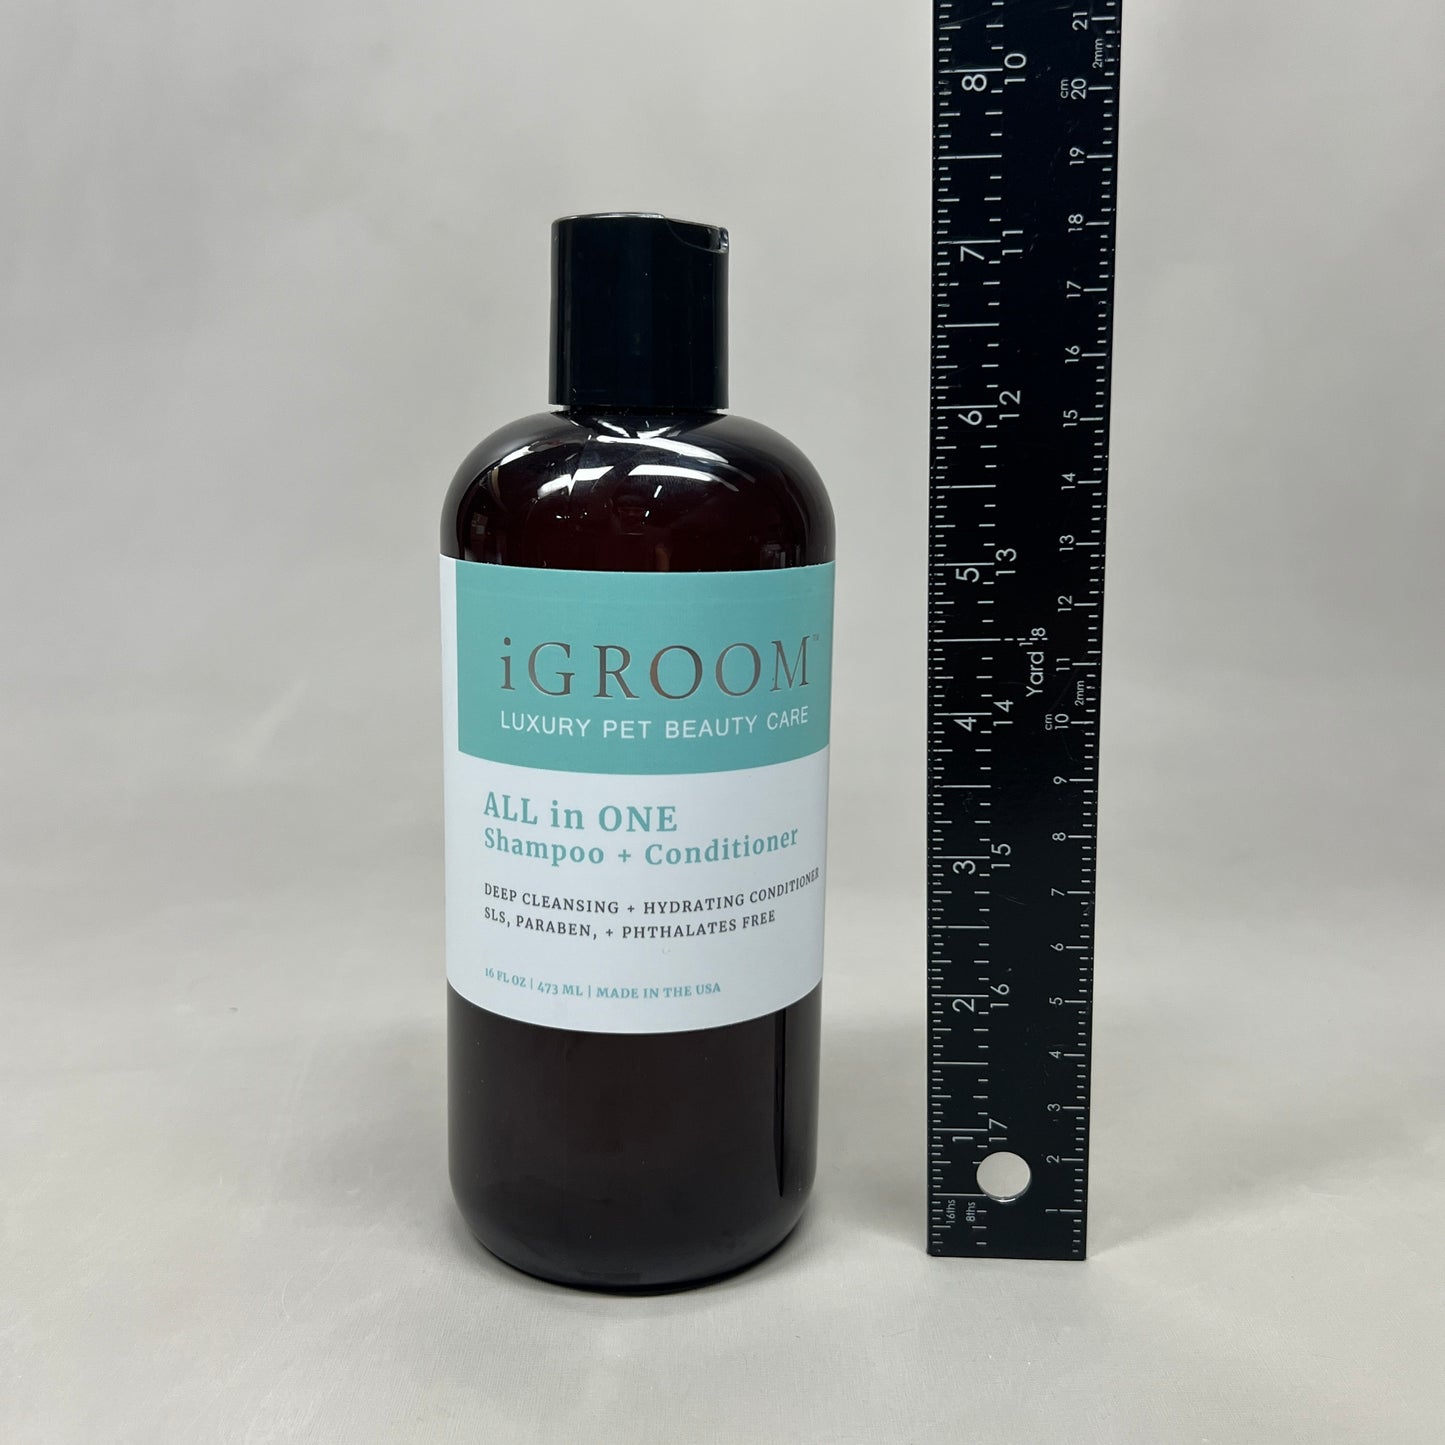 IGROOM All in One Pet Shampoo + Conditioner, Luxury Pet Beauty Care 16 fl oz (New)